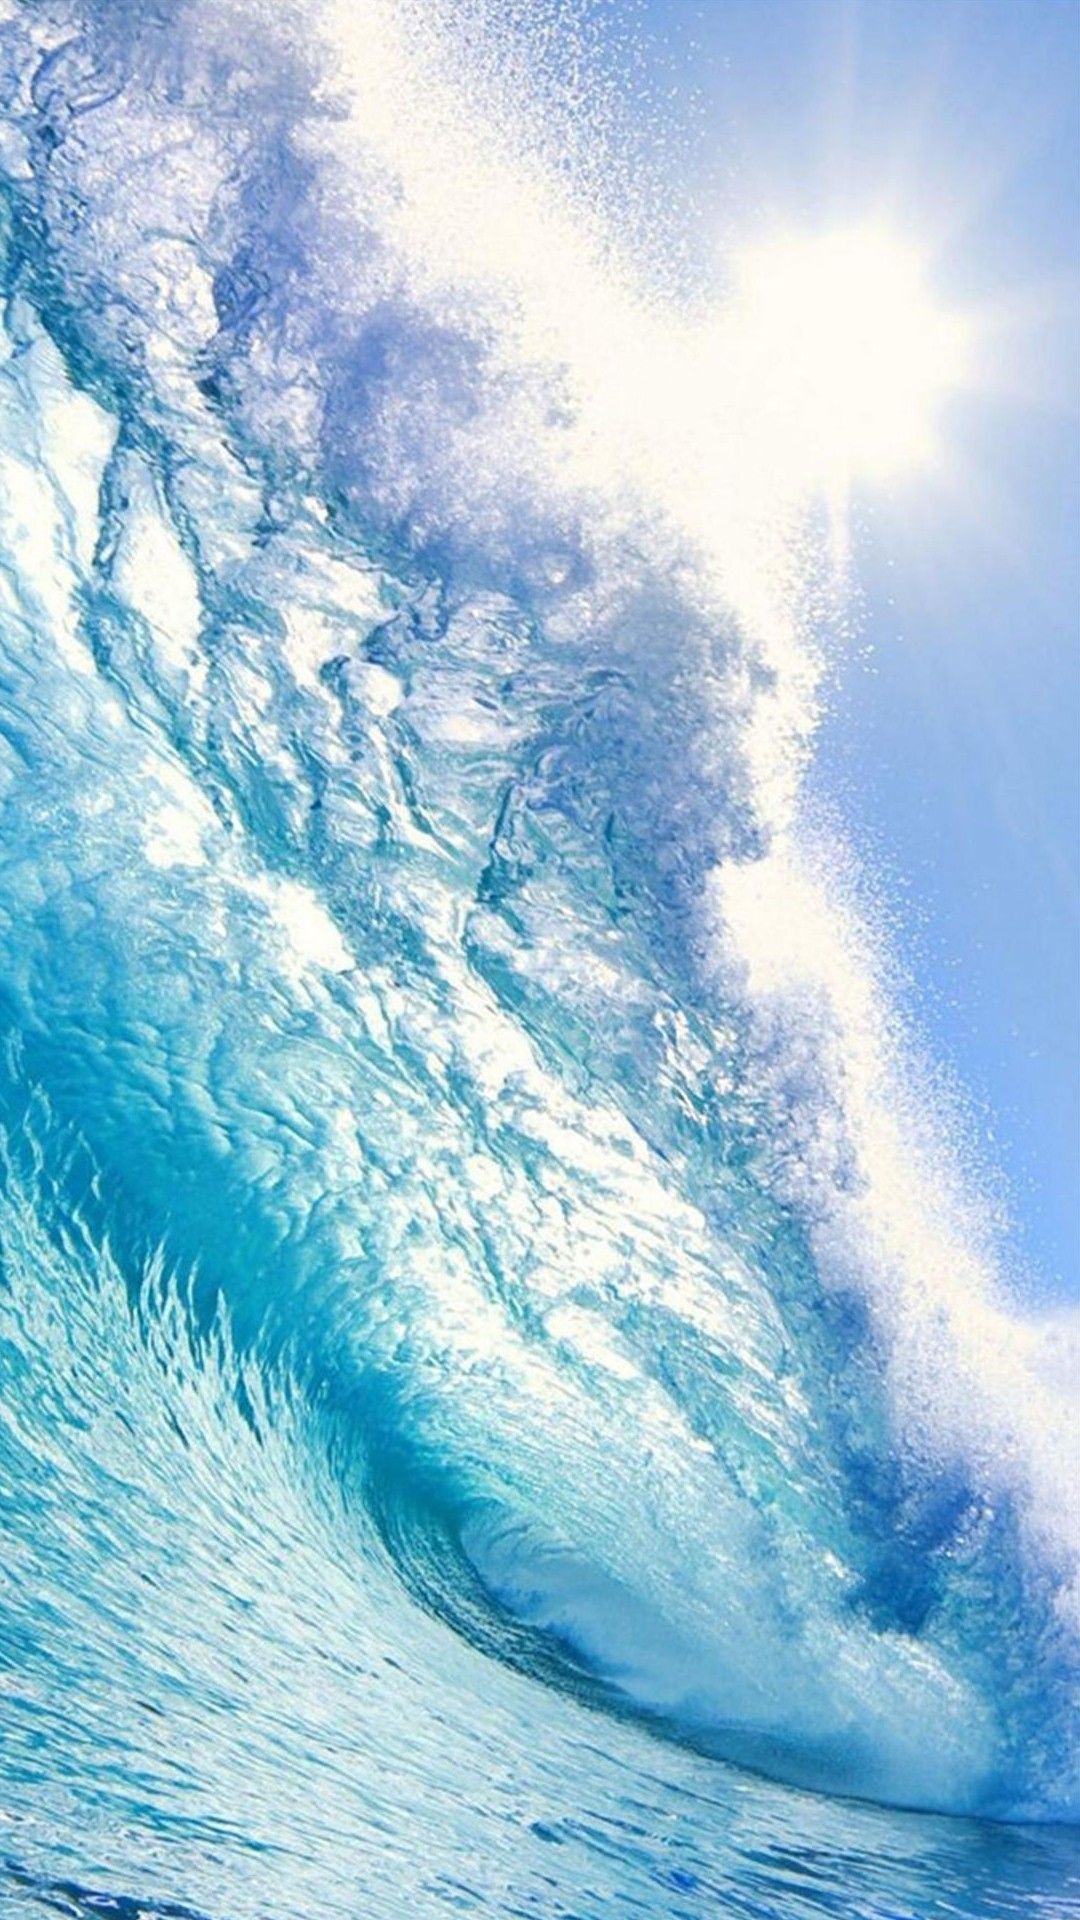 Blue wave beachK wallpaper, free and easy to download